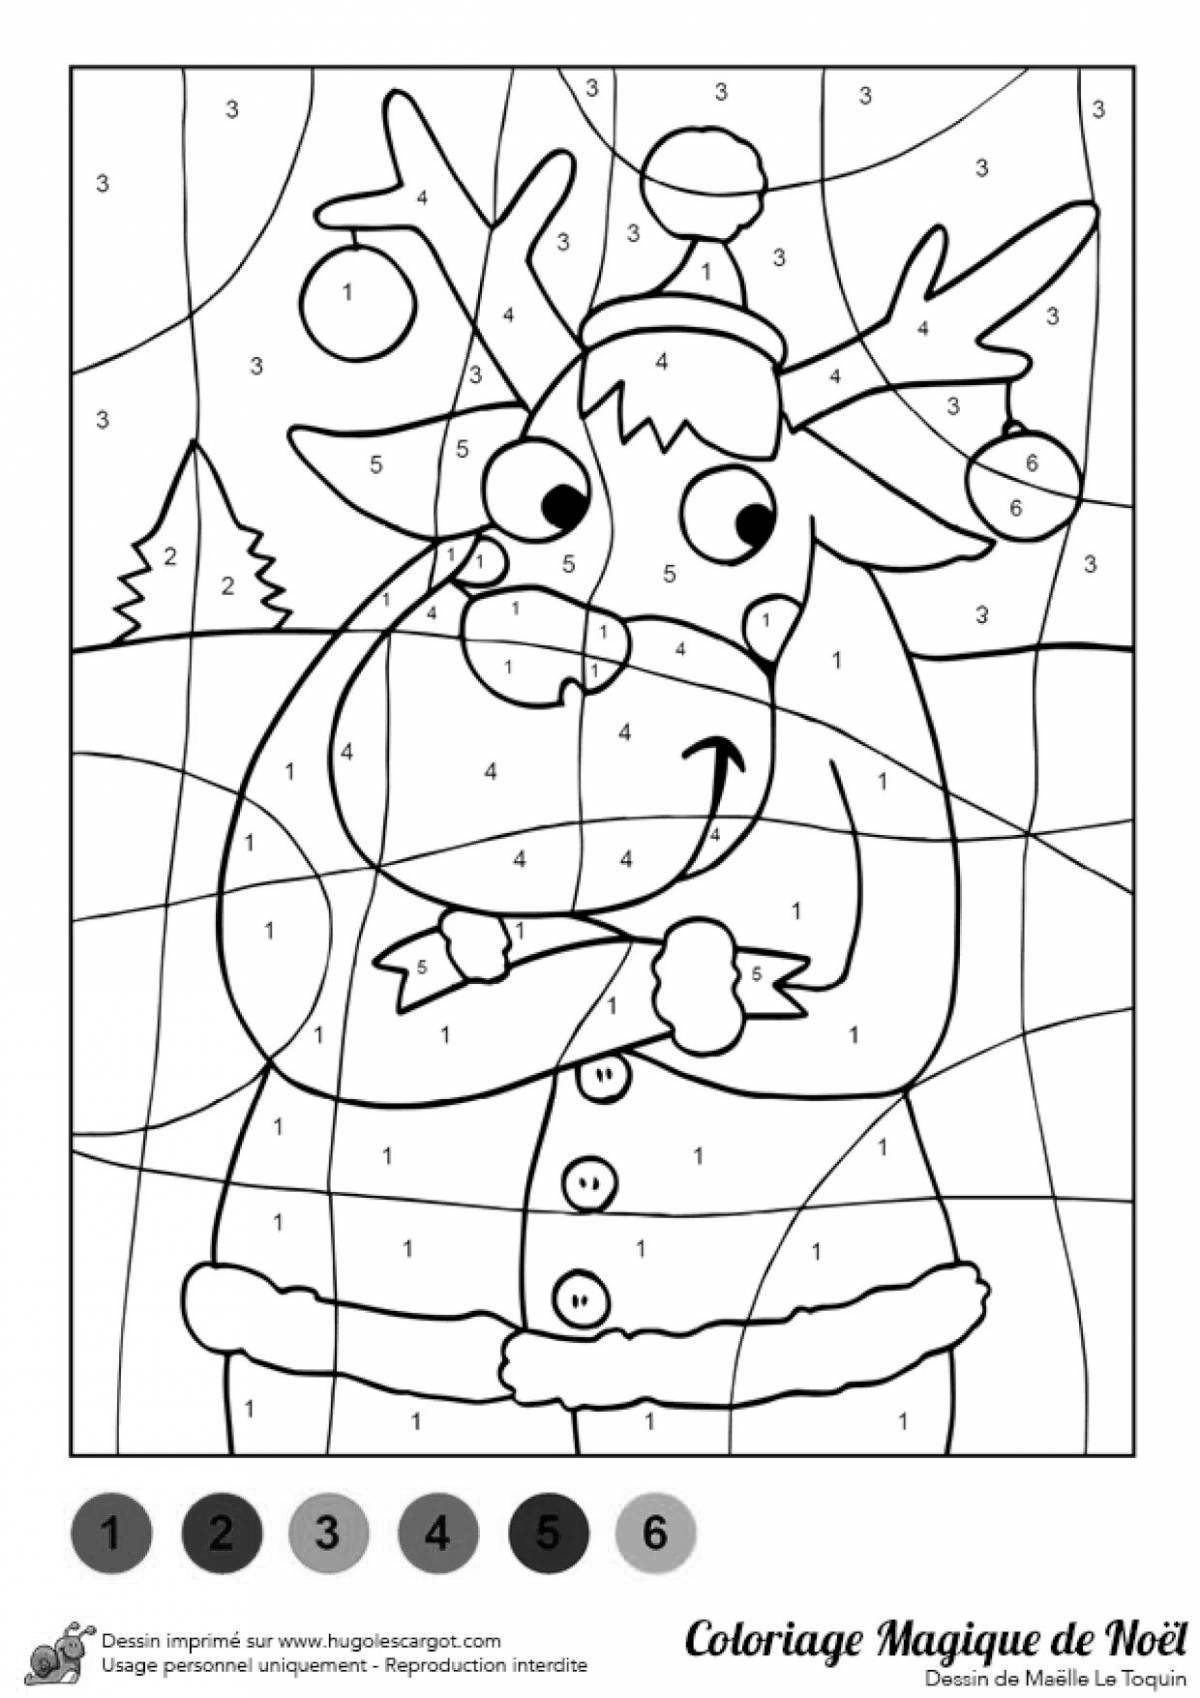 Adorable coloring by numbers winter for kids